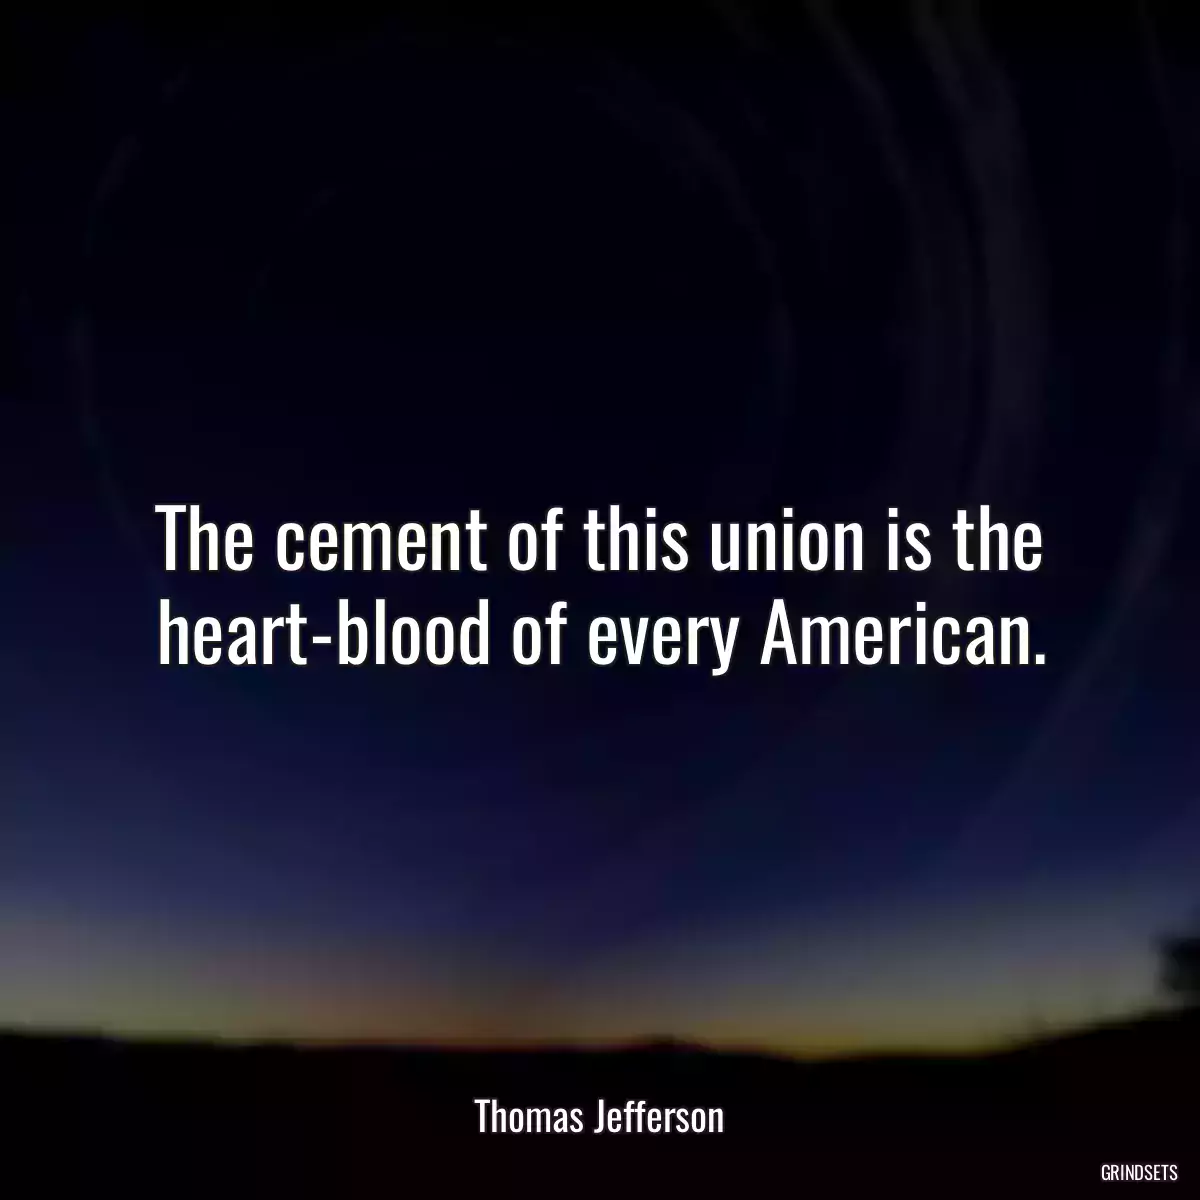 The cement of this union is the heart-blood of every American.